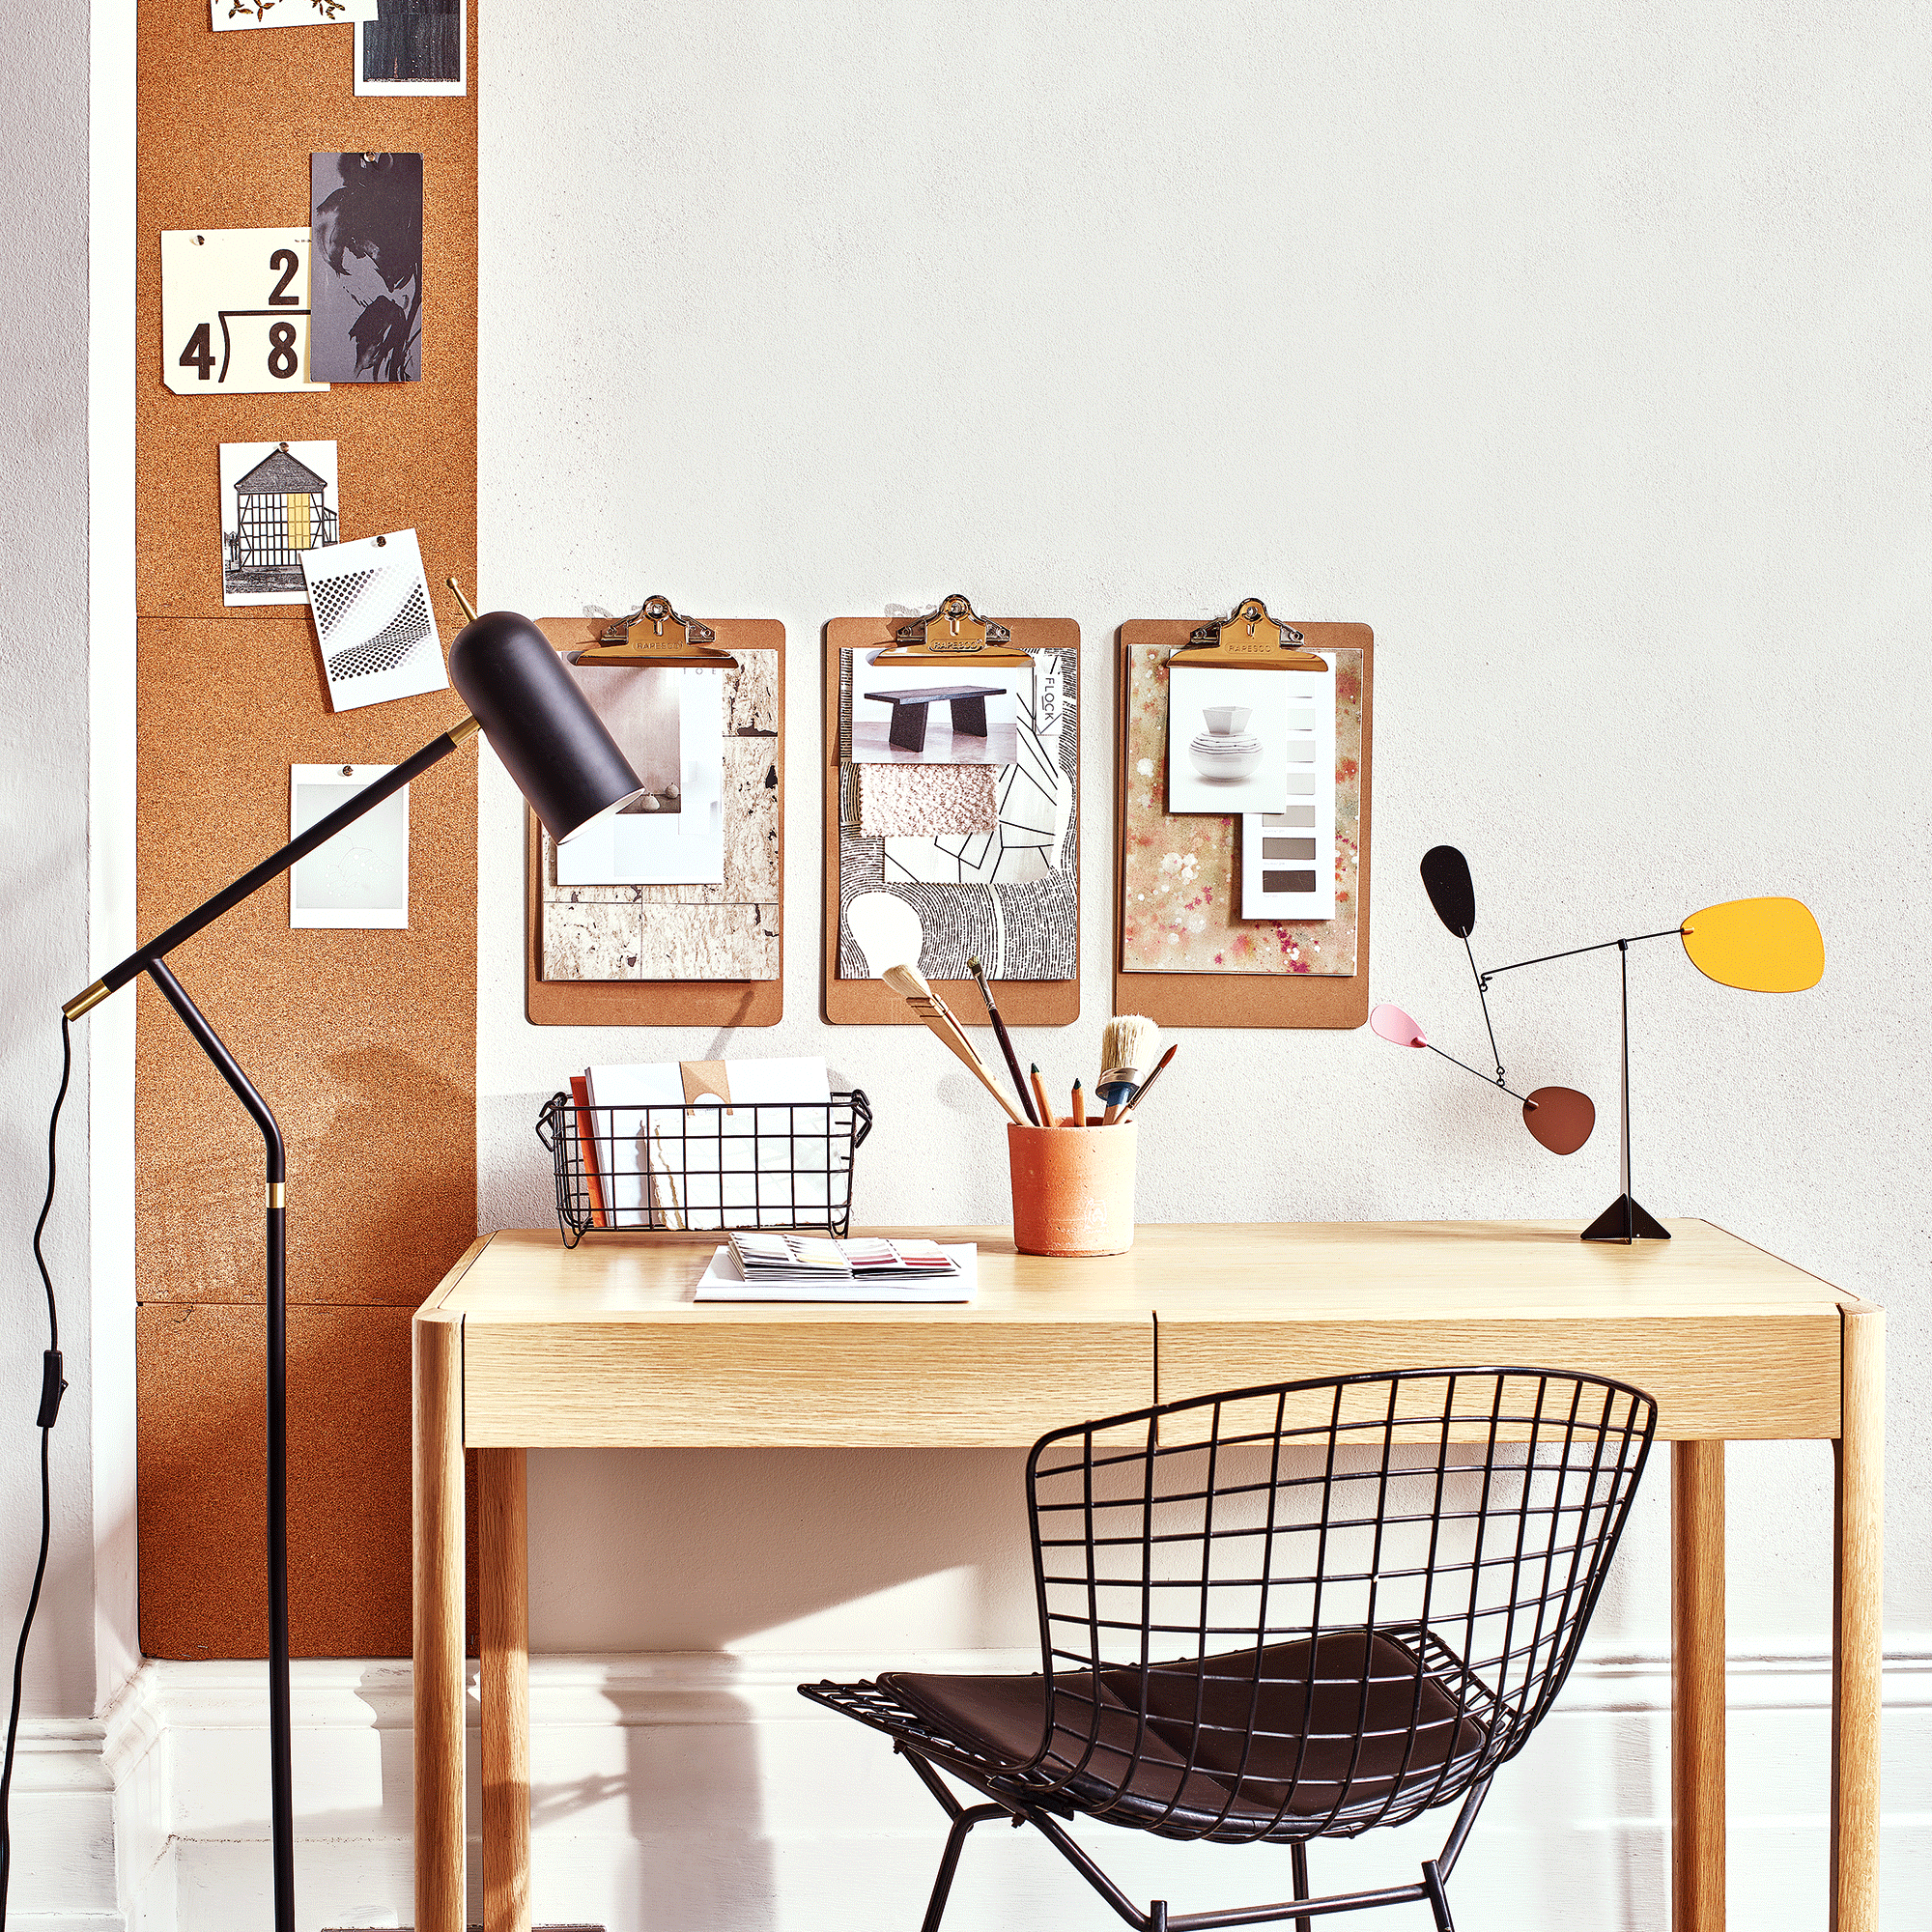 Small wooden desk with corkboard areas above and to one side